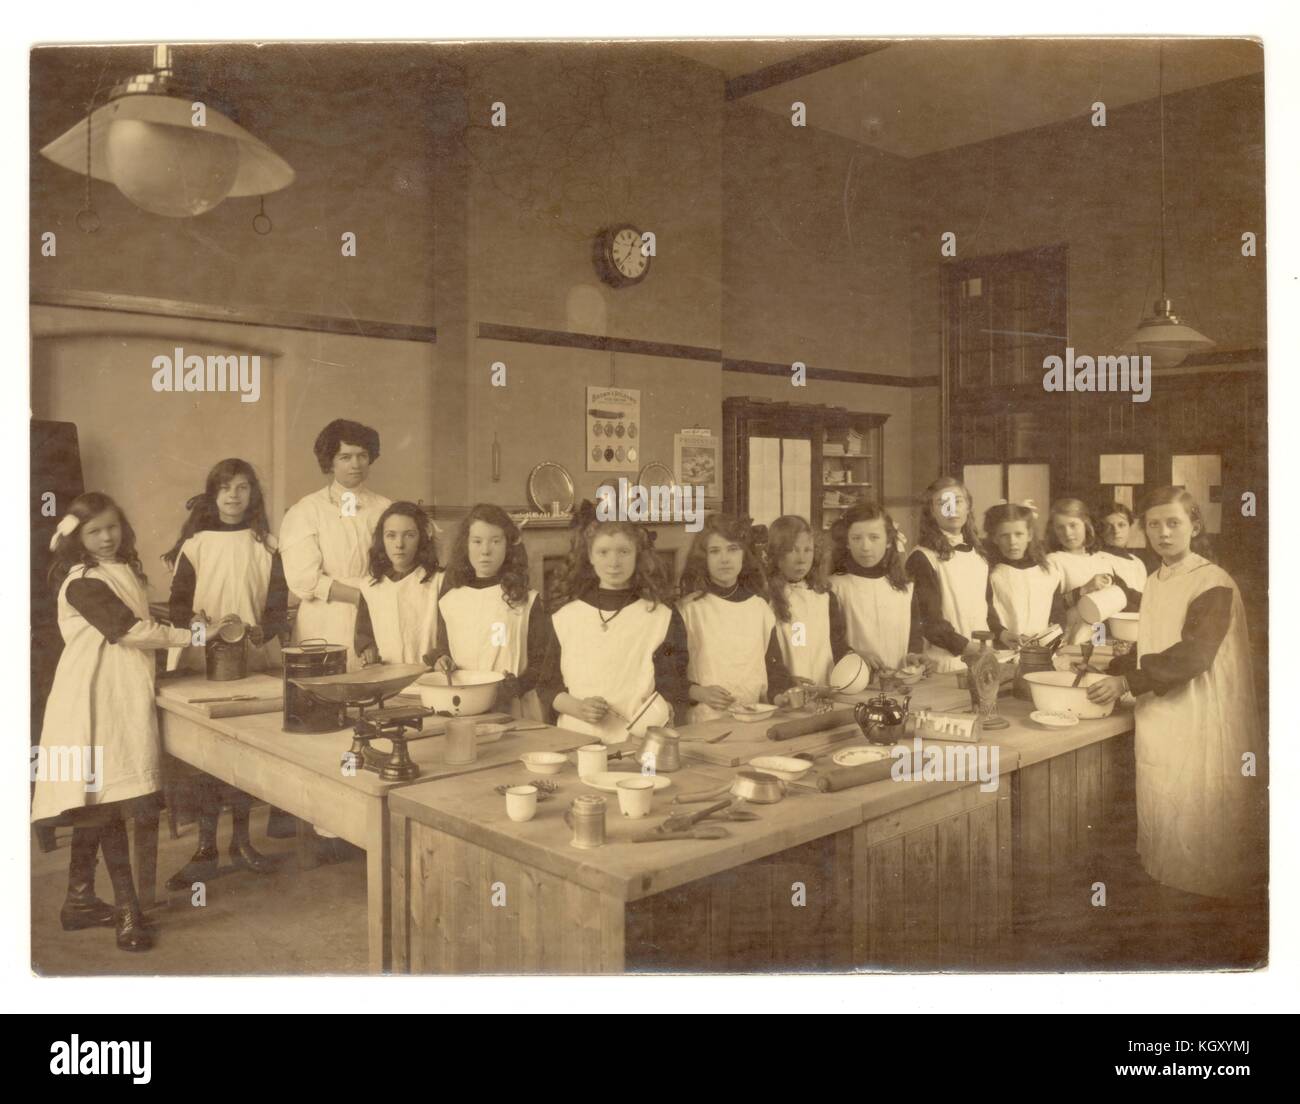 Original photograph of Edwardian girls in a Domestic Science class, learning baking and cookery in school kitchen, circa 1910, U.K. Stock Photo